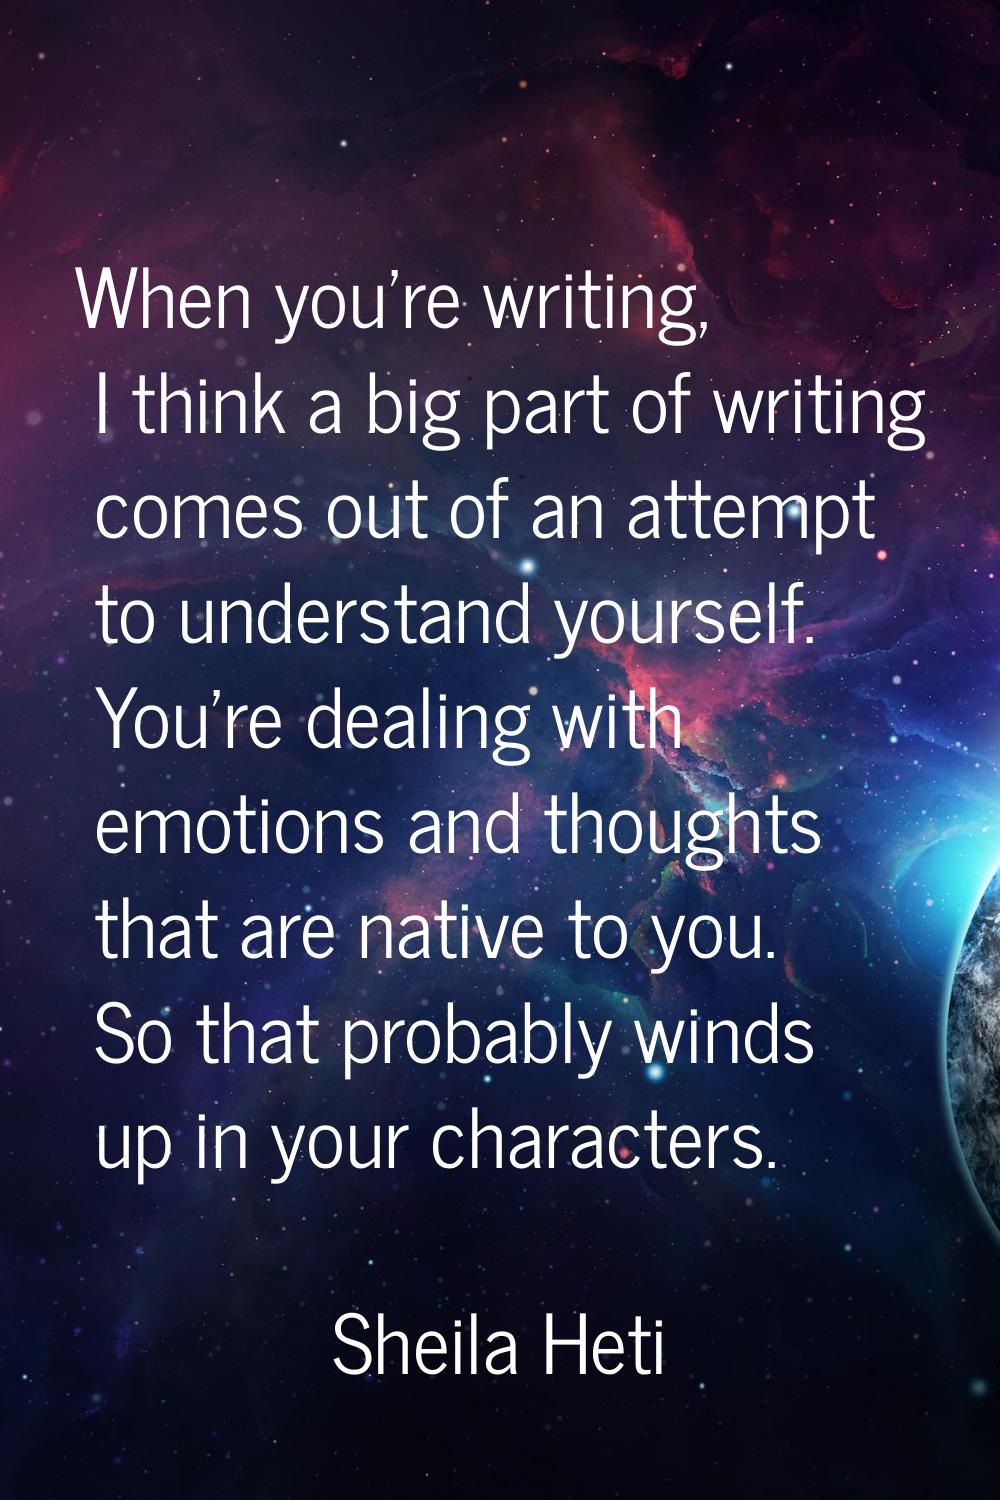 When you're writing, I think a big part of writing comes out of an attempt to understand yourself. 